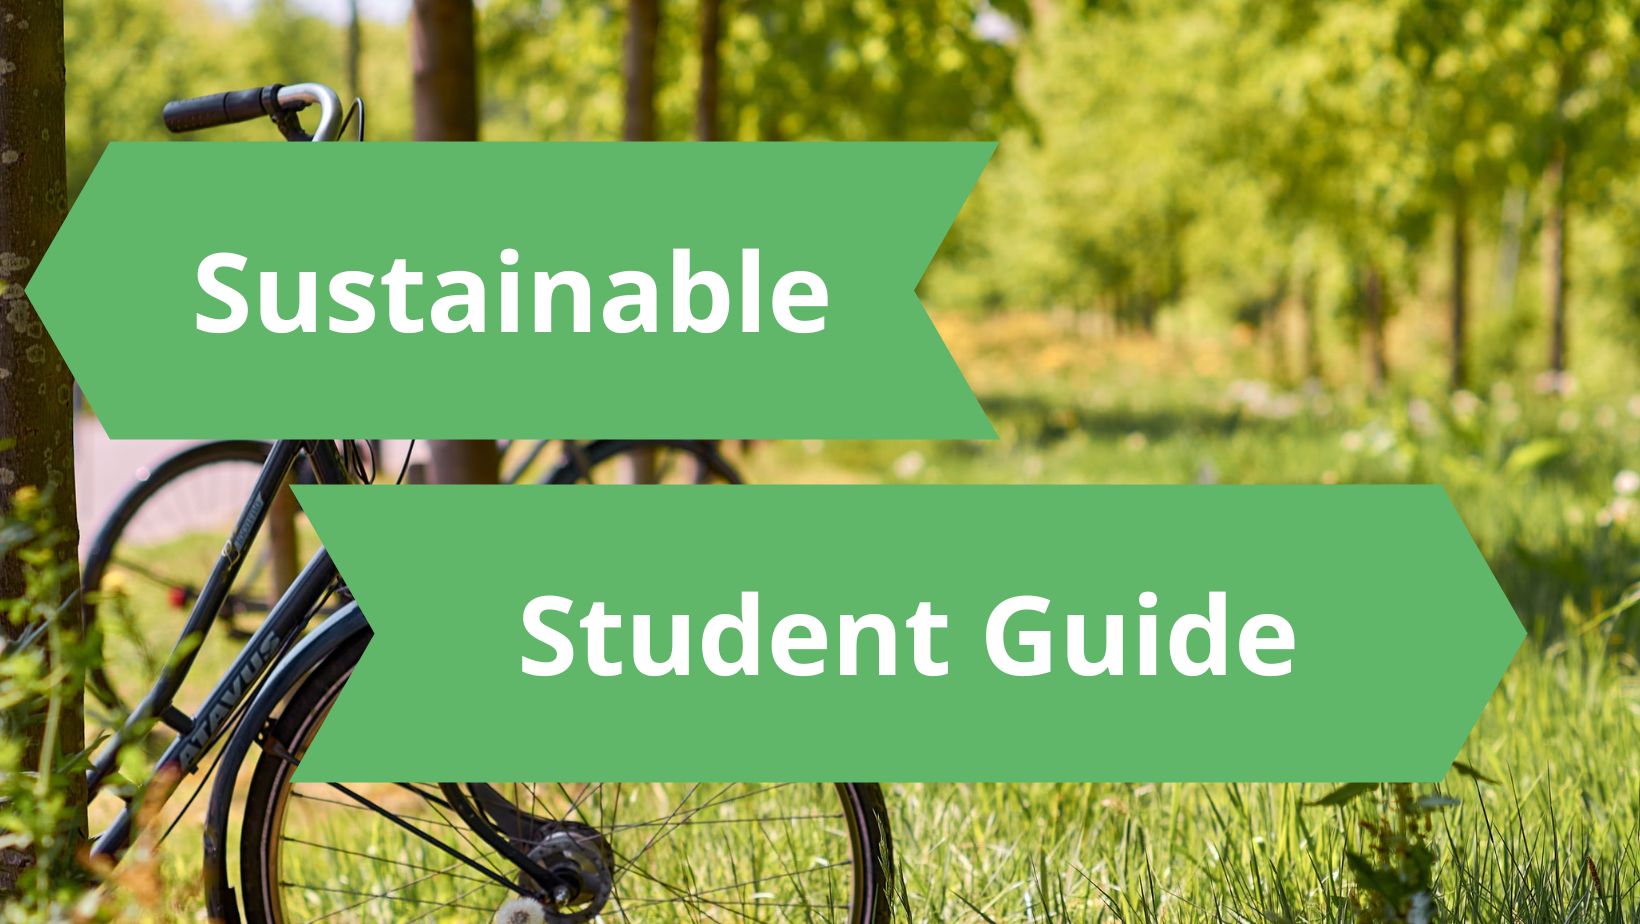 Sustainability during your study